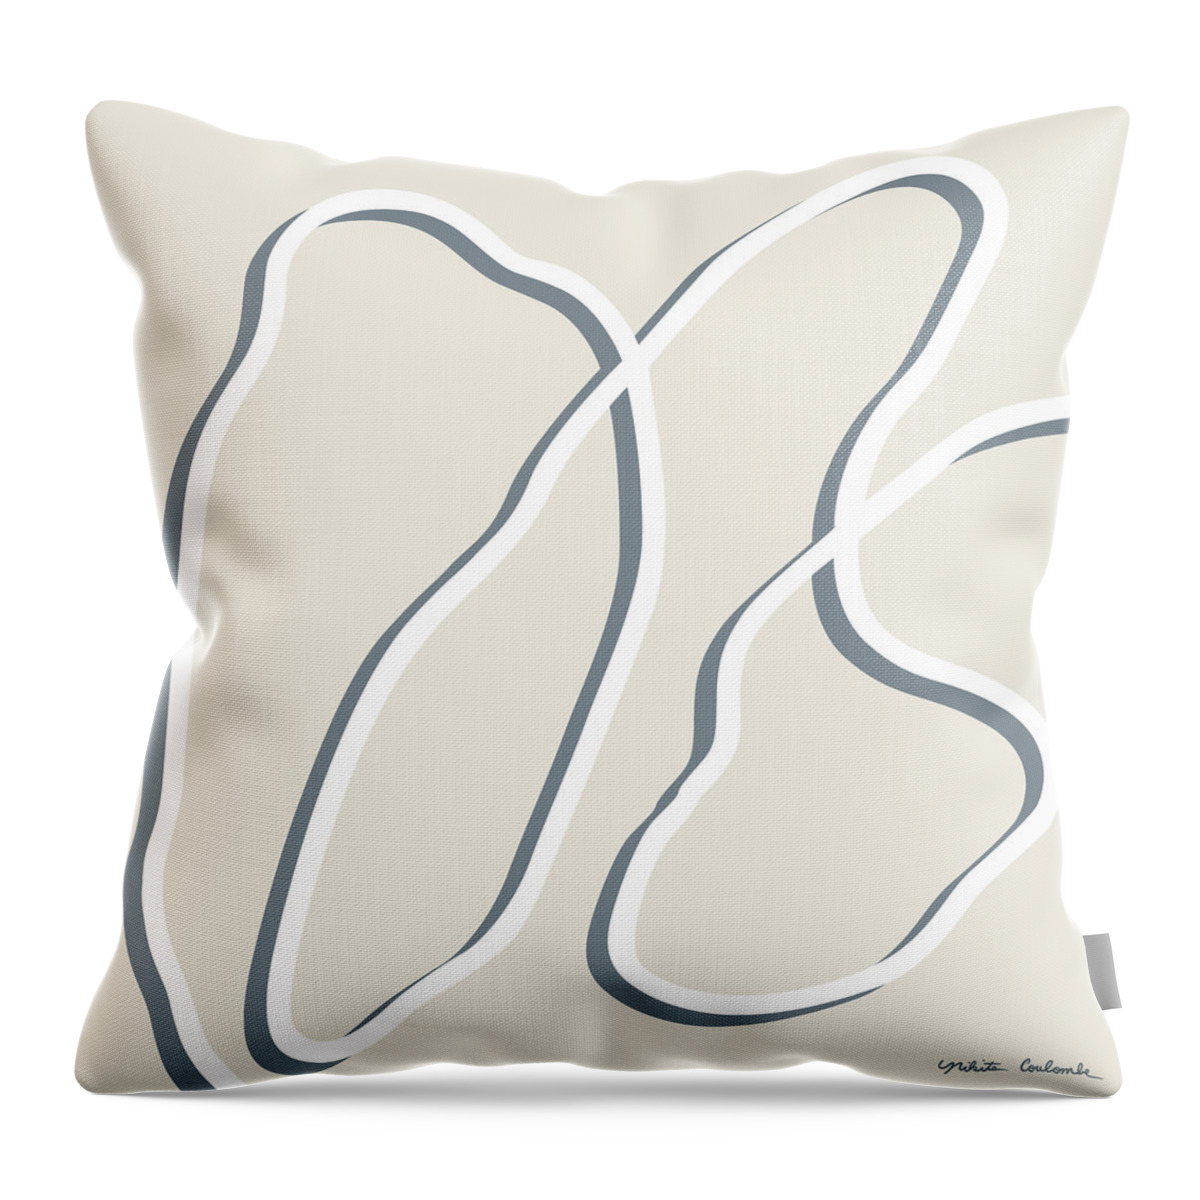 Nikita Coulombe Throw Pillow featuring the painting Untitled 52 by Nikita Coulombe